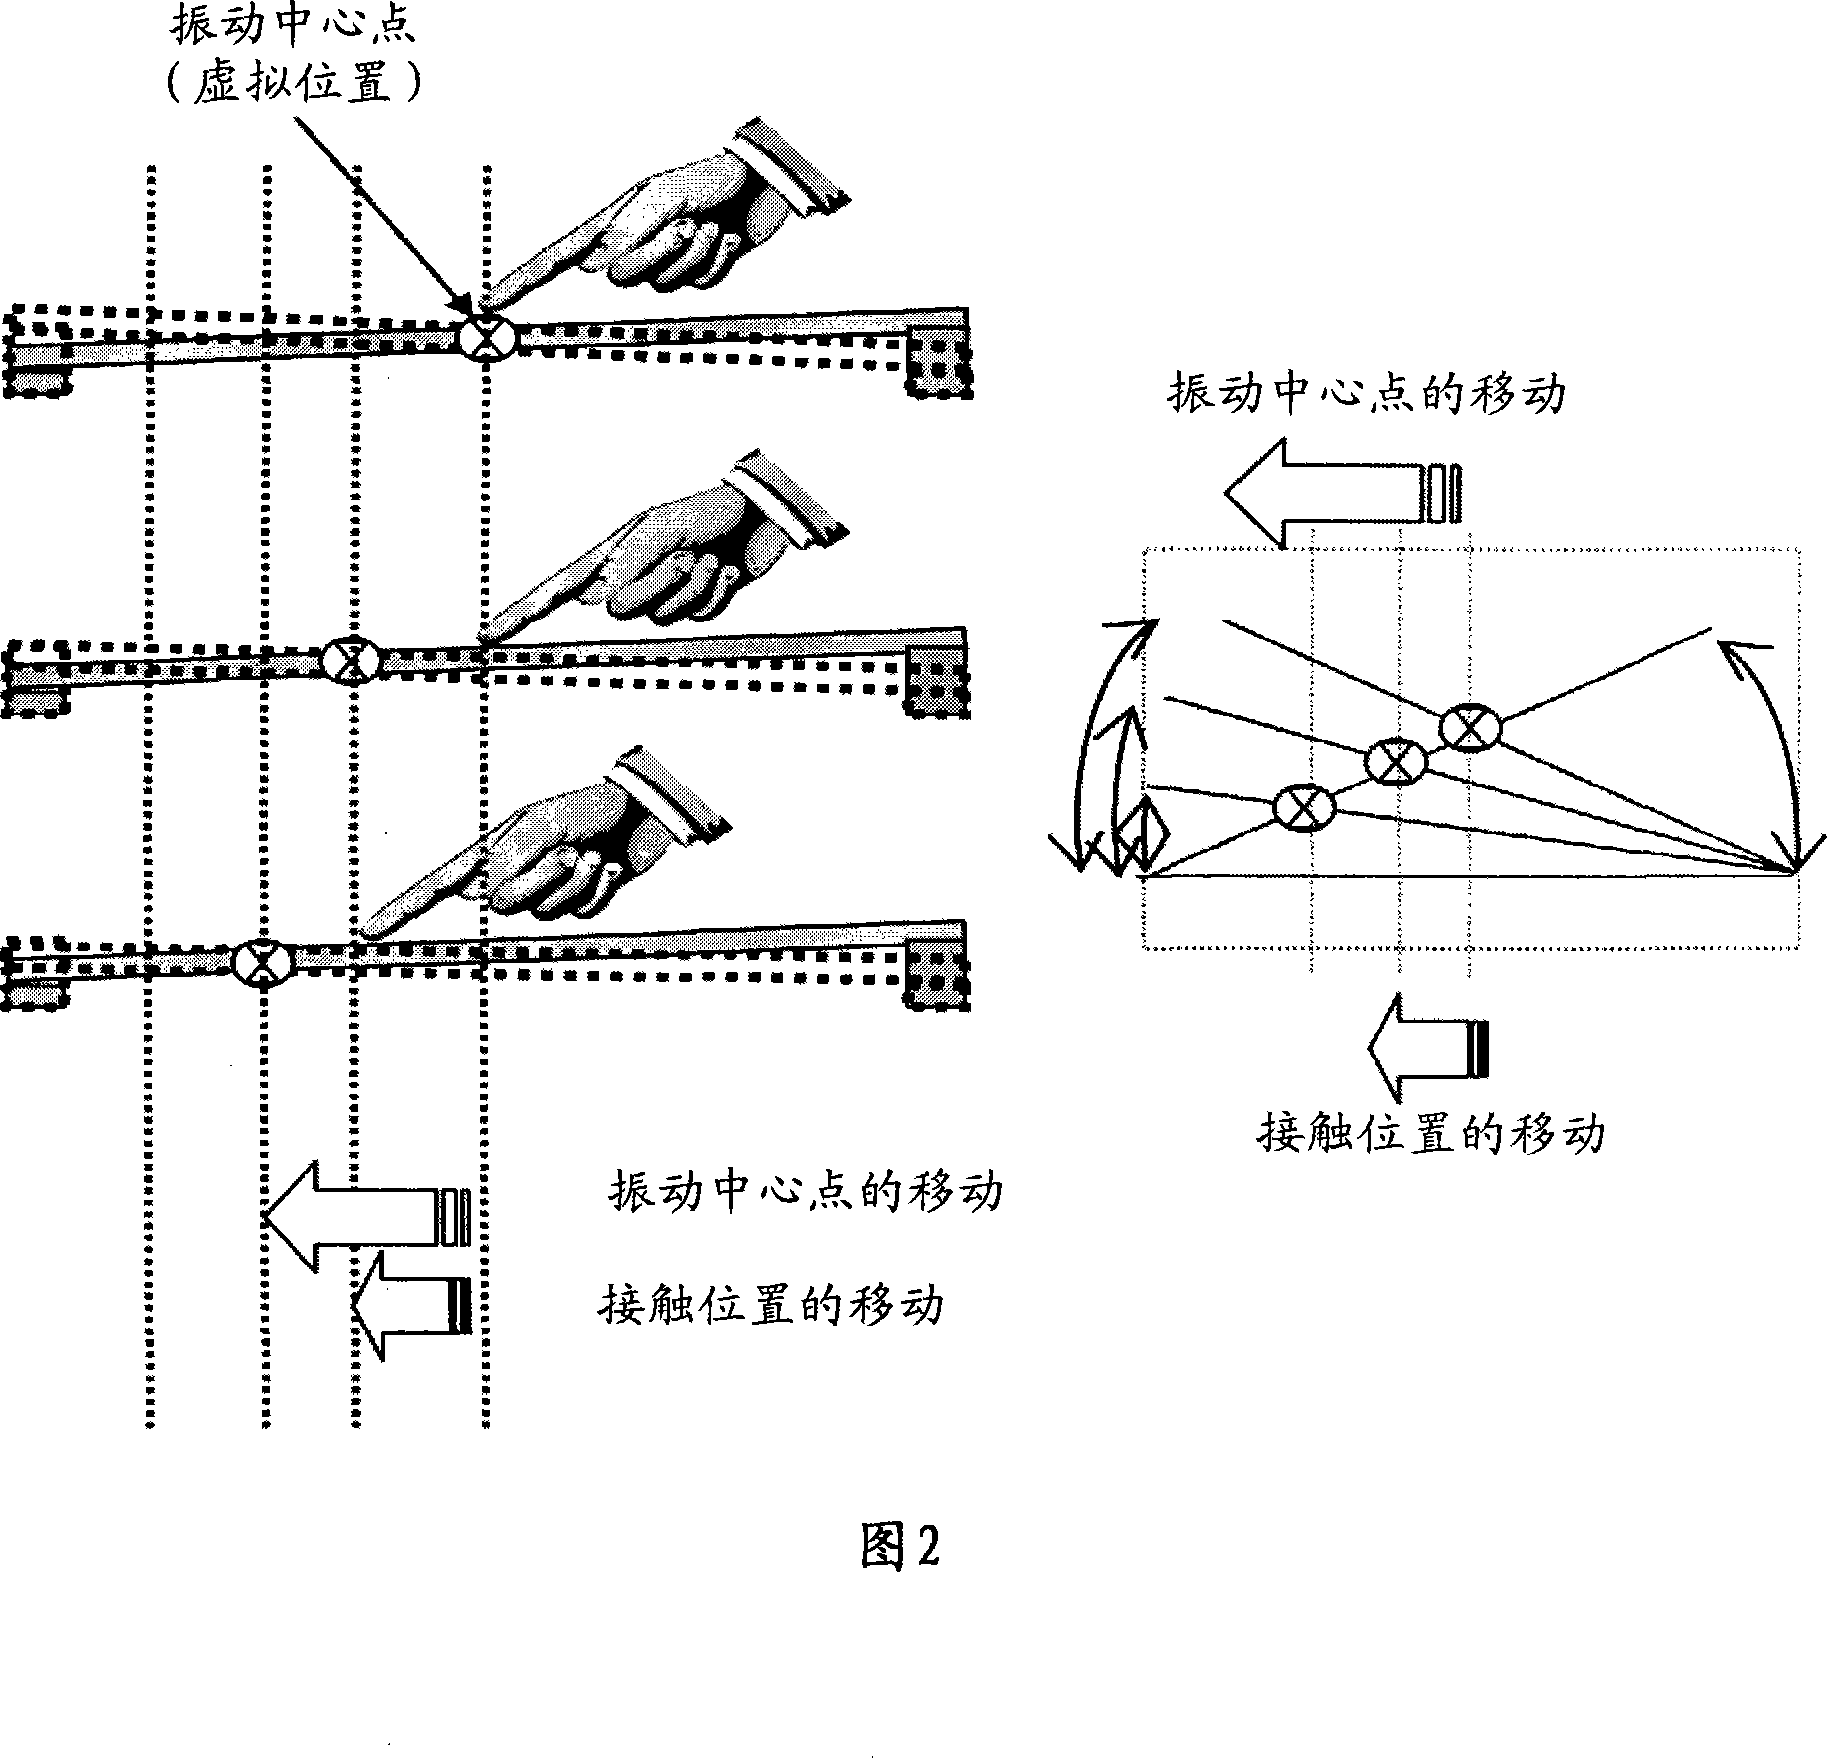 Apparatus, method, and medium for outputting tactile feedback on display device